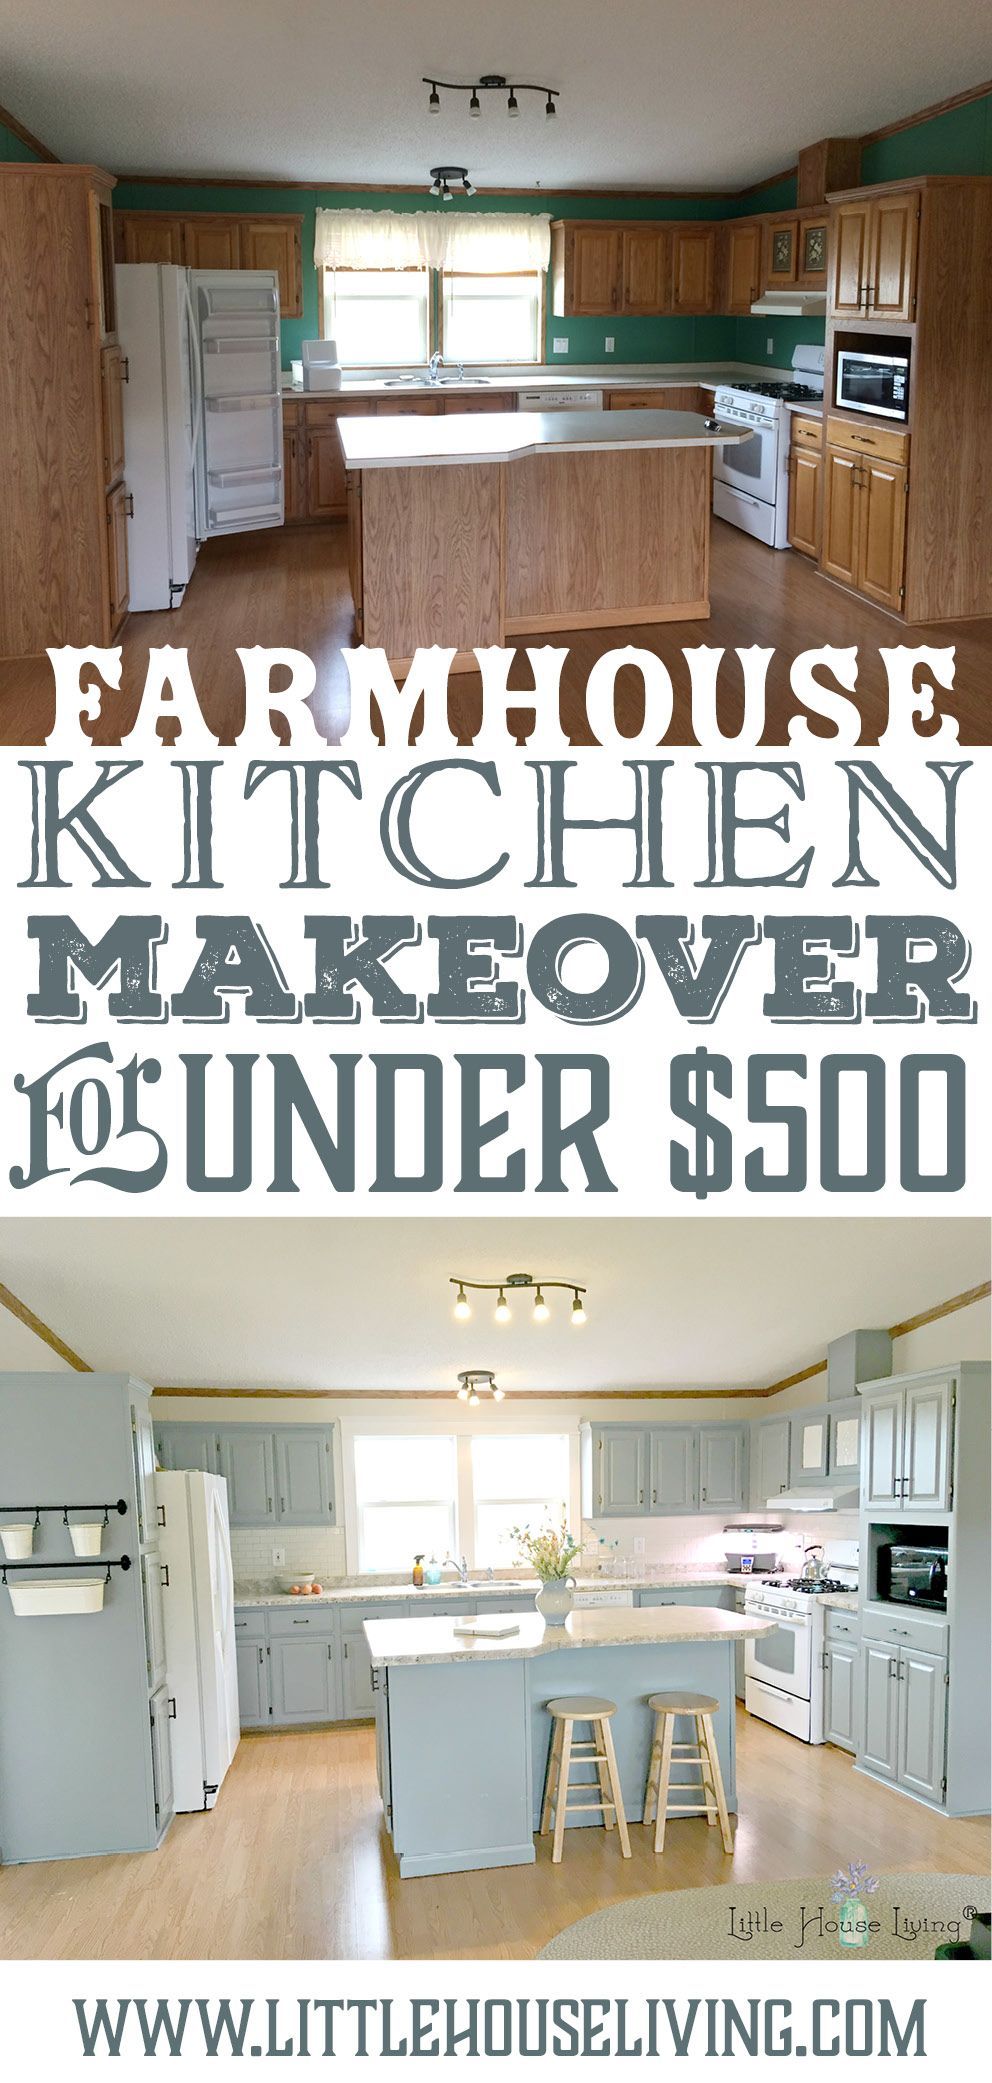 Complete Frugal Kitchen Makeover for Less Than $500 - Complete Frugal Kitchen Makeover for Less Than $500 -   15 diy House improvements ideas